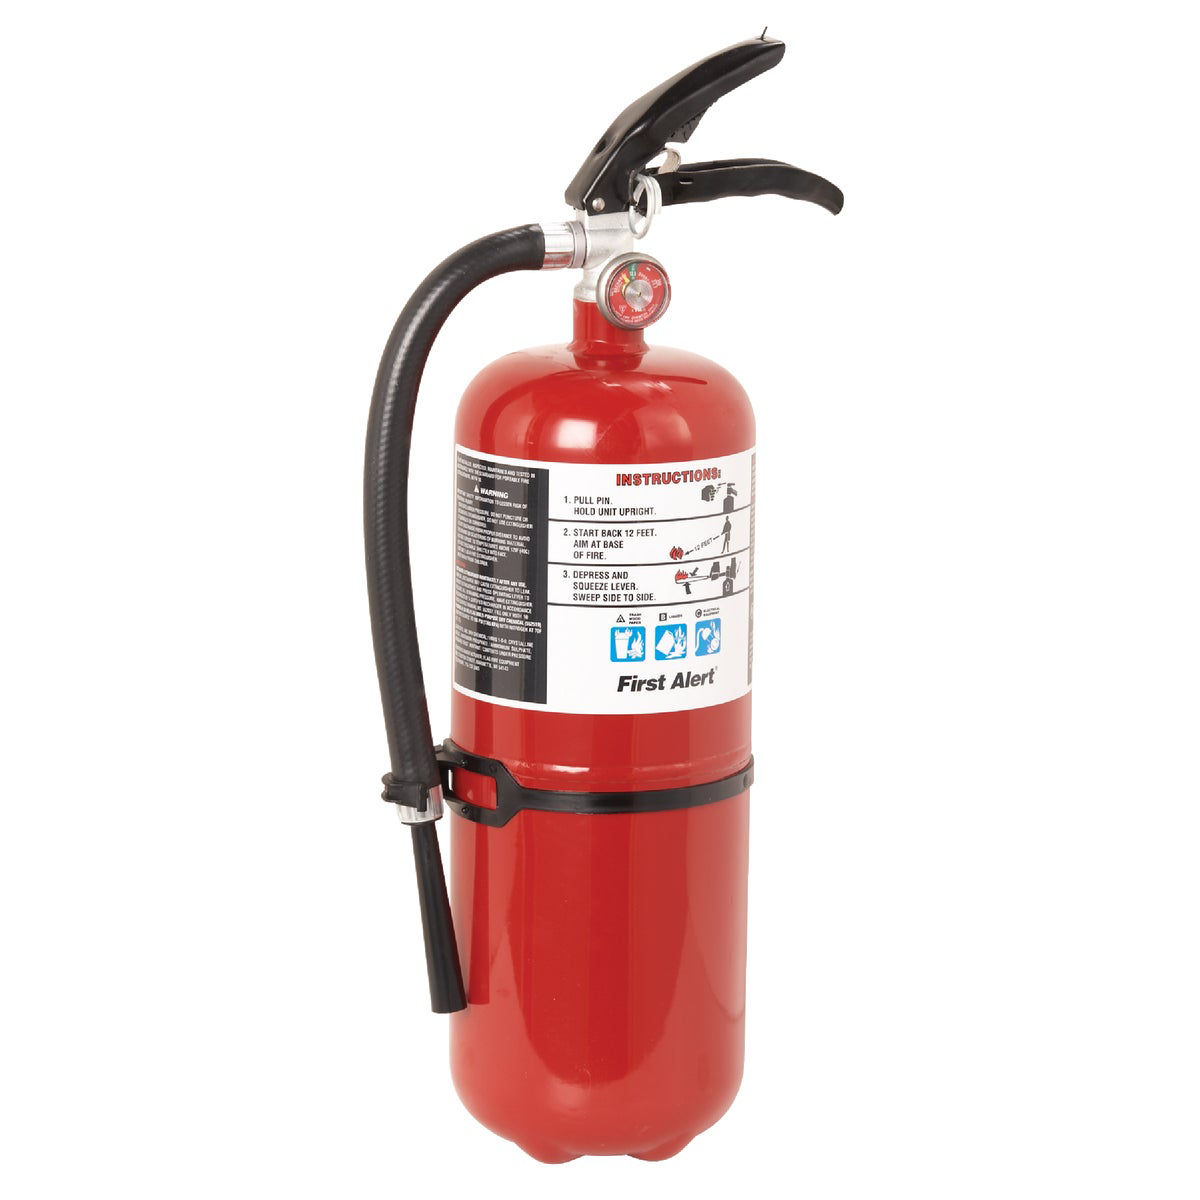 The Best Fire Extinguisher Balls for any RV, Travel Trailers